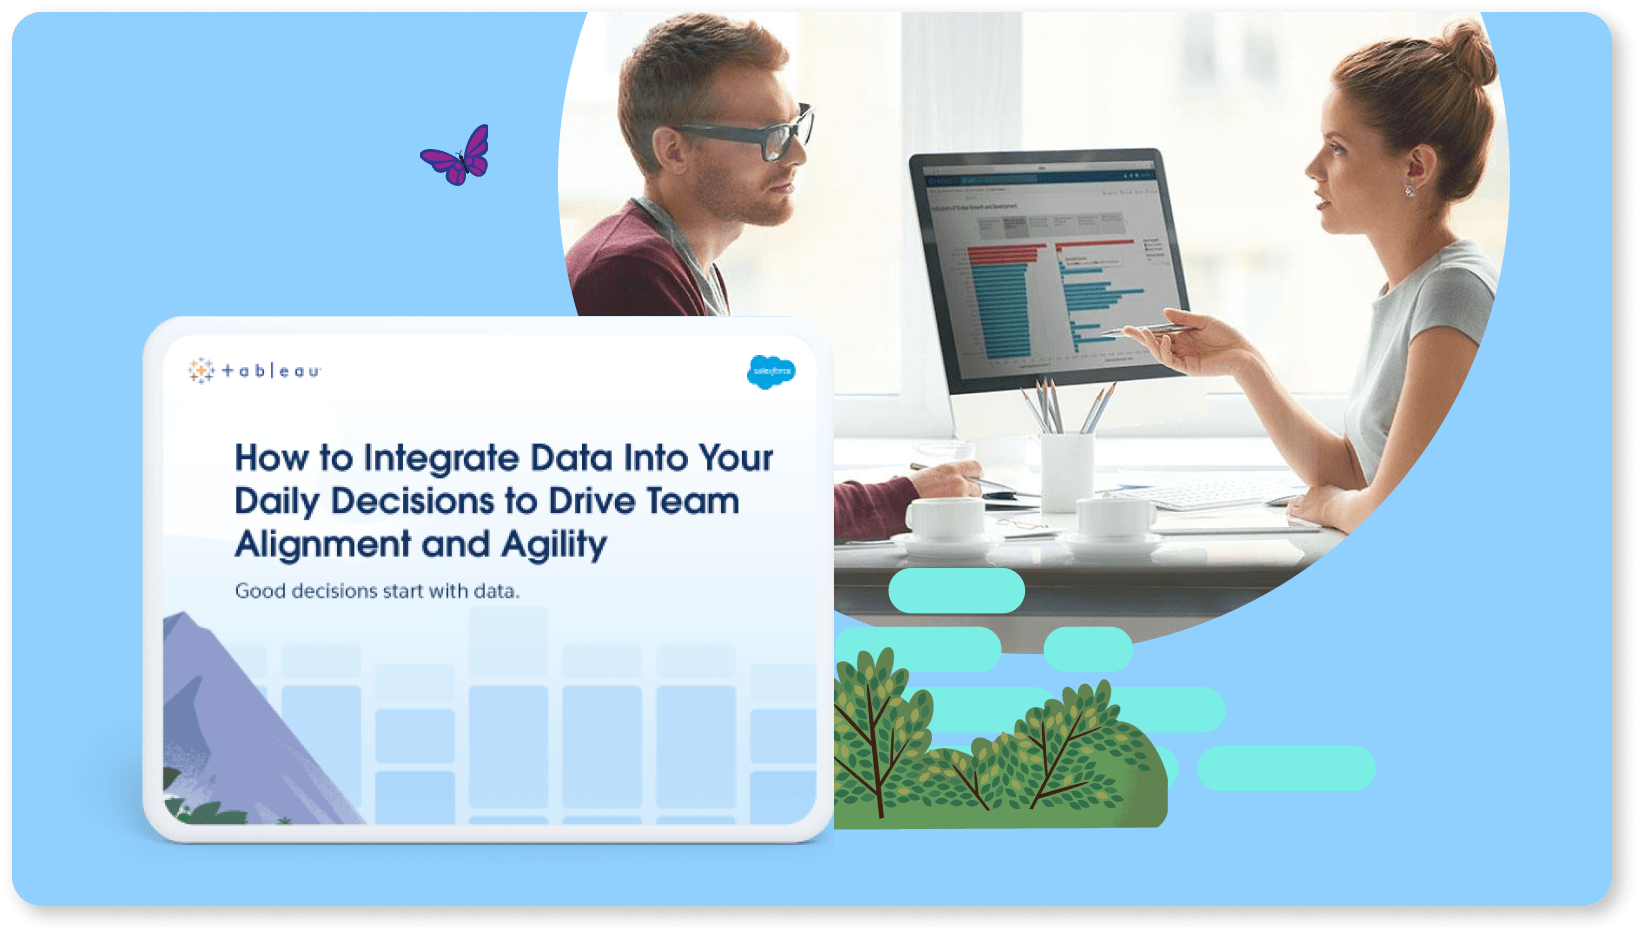 Navigate to How to Integrate Data Into Your Daily Decisions to Drive Team Alignment and Agility